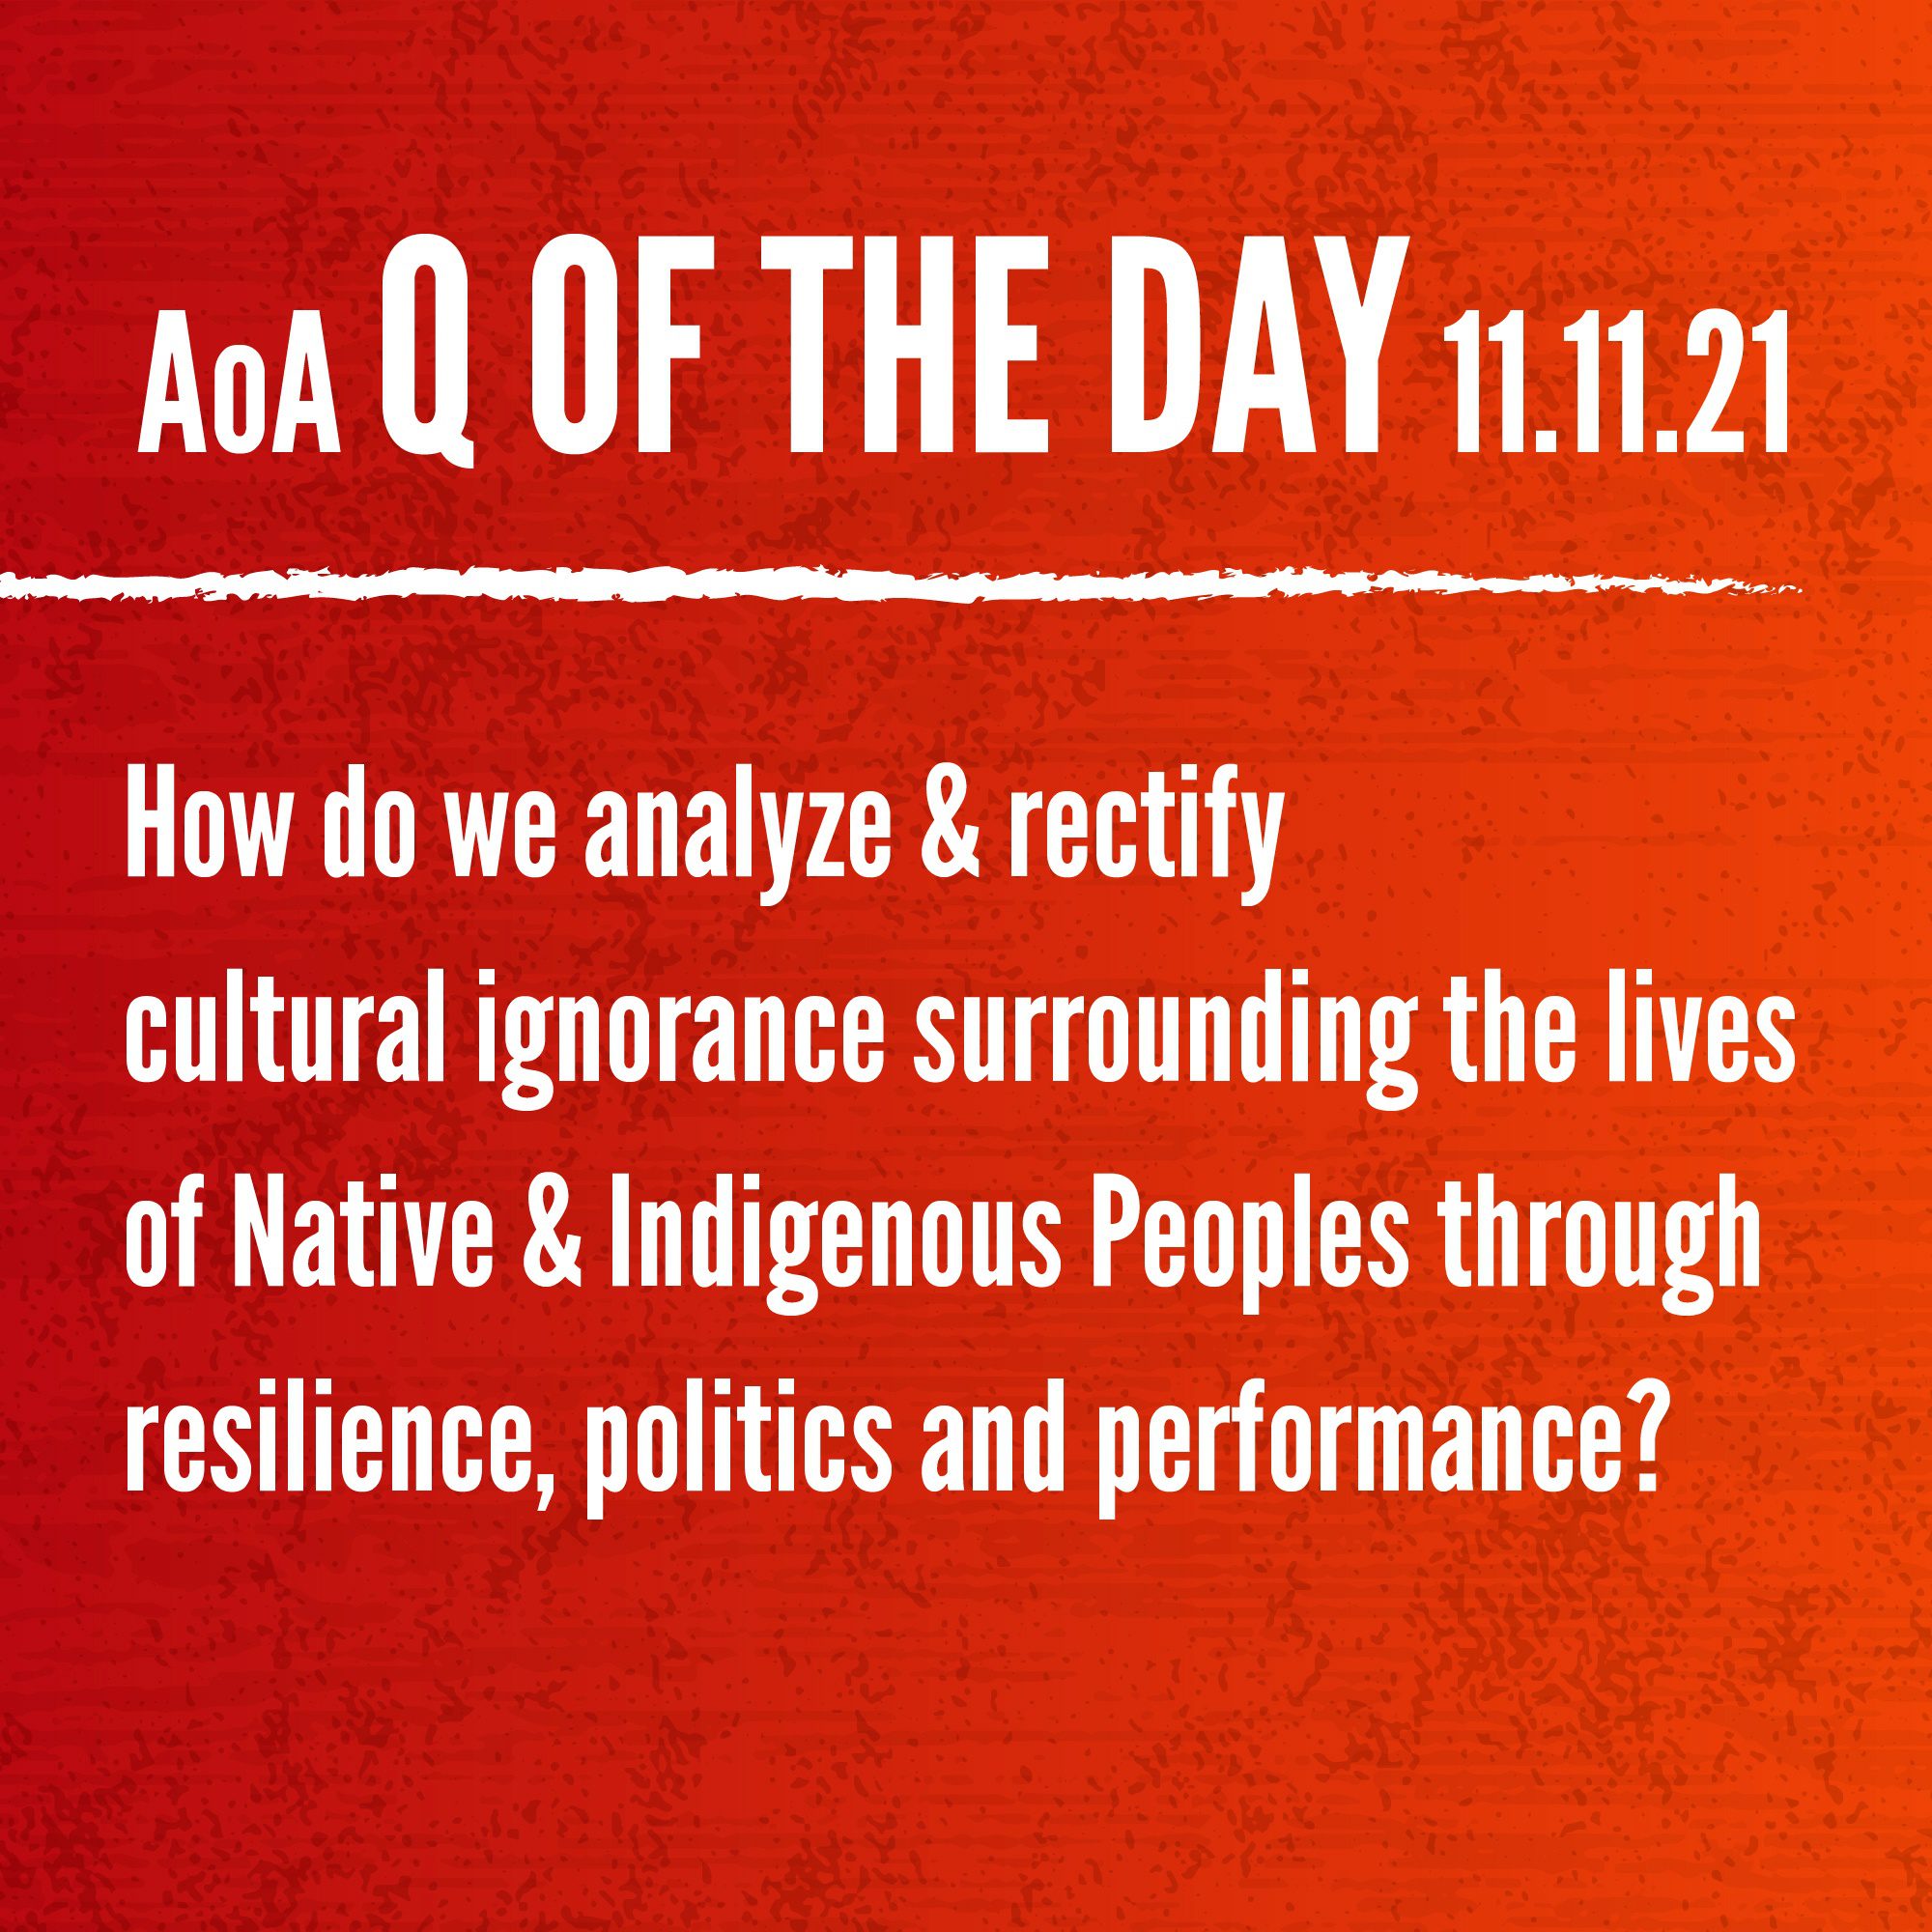 AoA Q of the day November 11, 2021: How do we analyze and rectify cultural ignorance surrounding the lives of Nave and Indigenous Peoples through resilience, politics and performance?